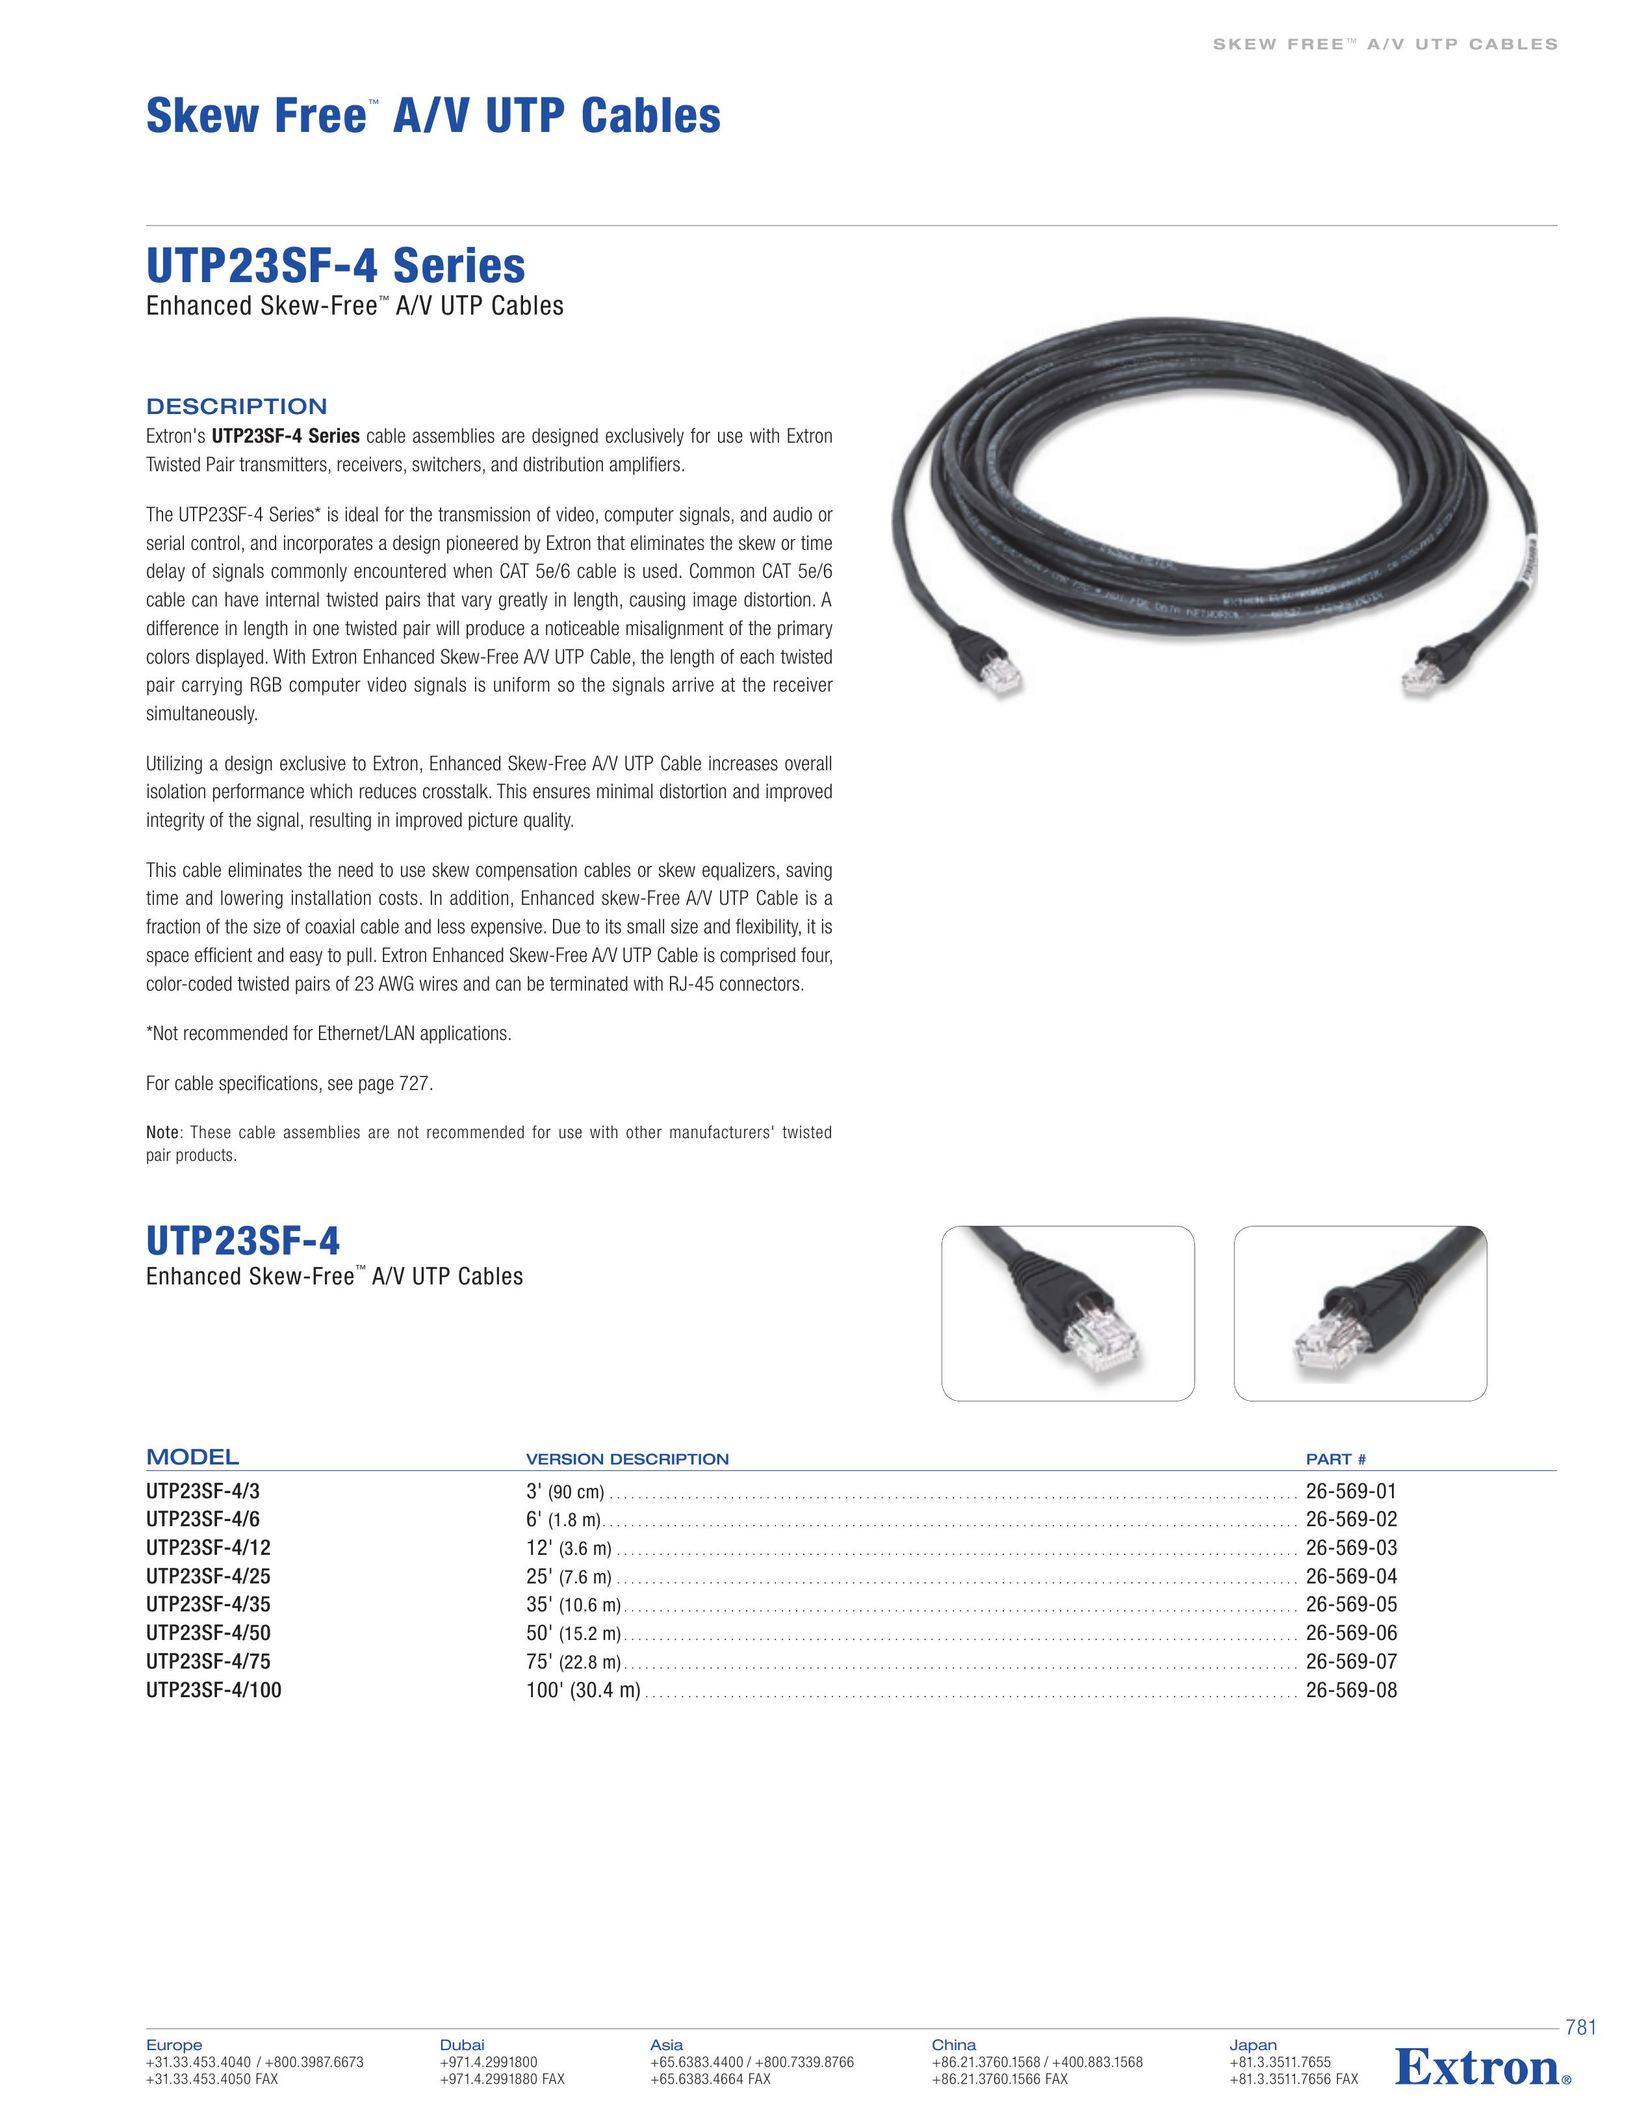 Extron electronic UTP23SF-4/100 TV Cables User Manual